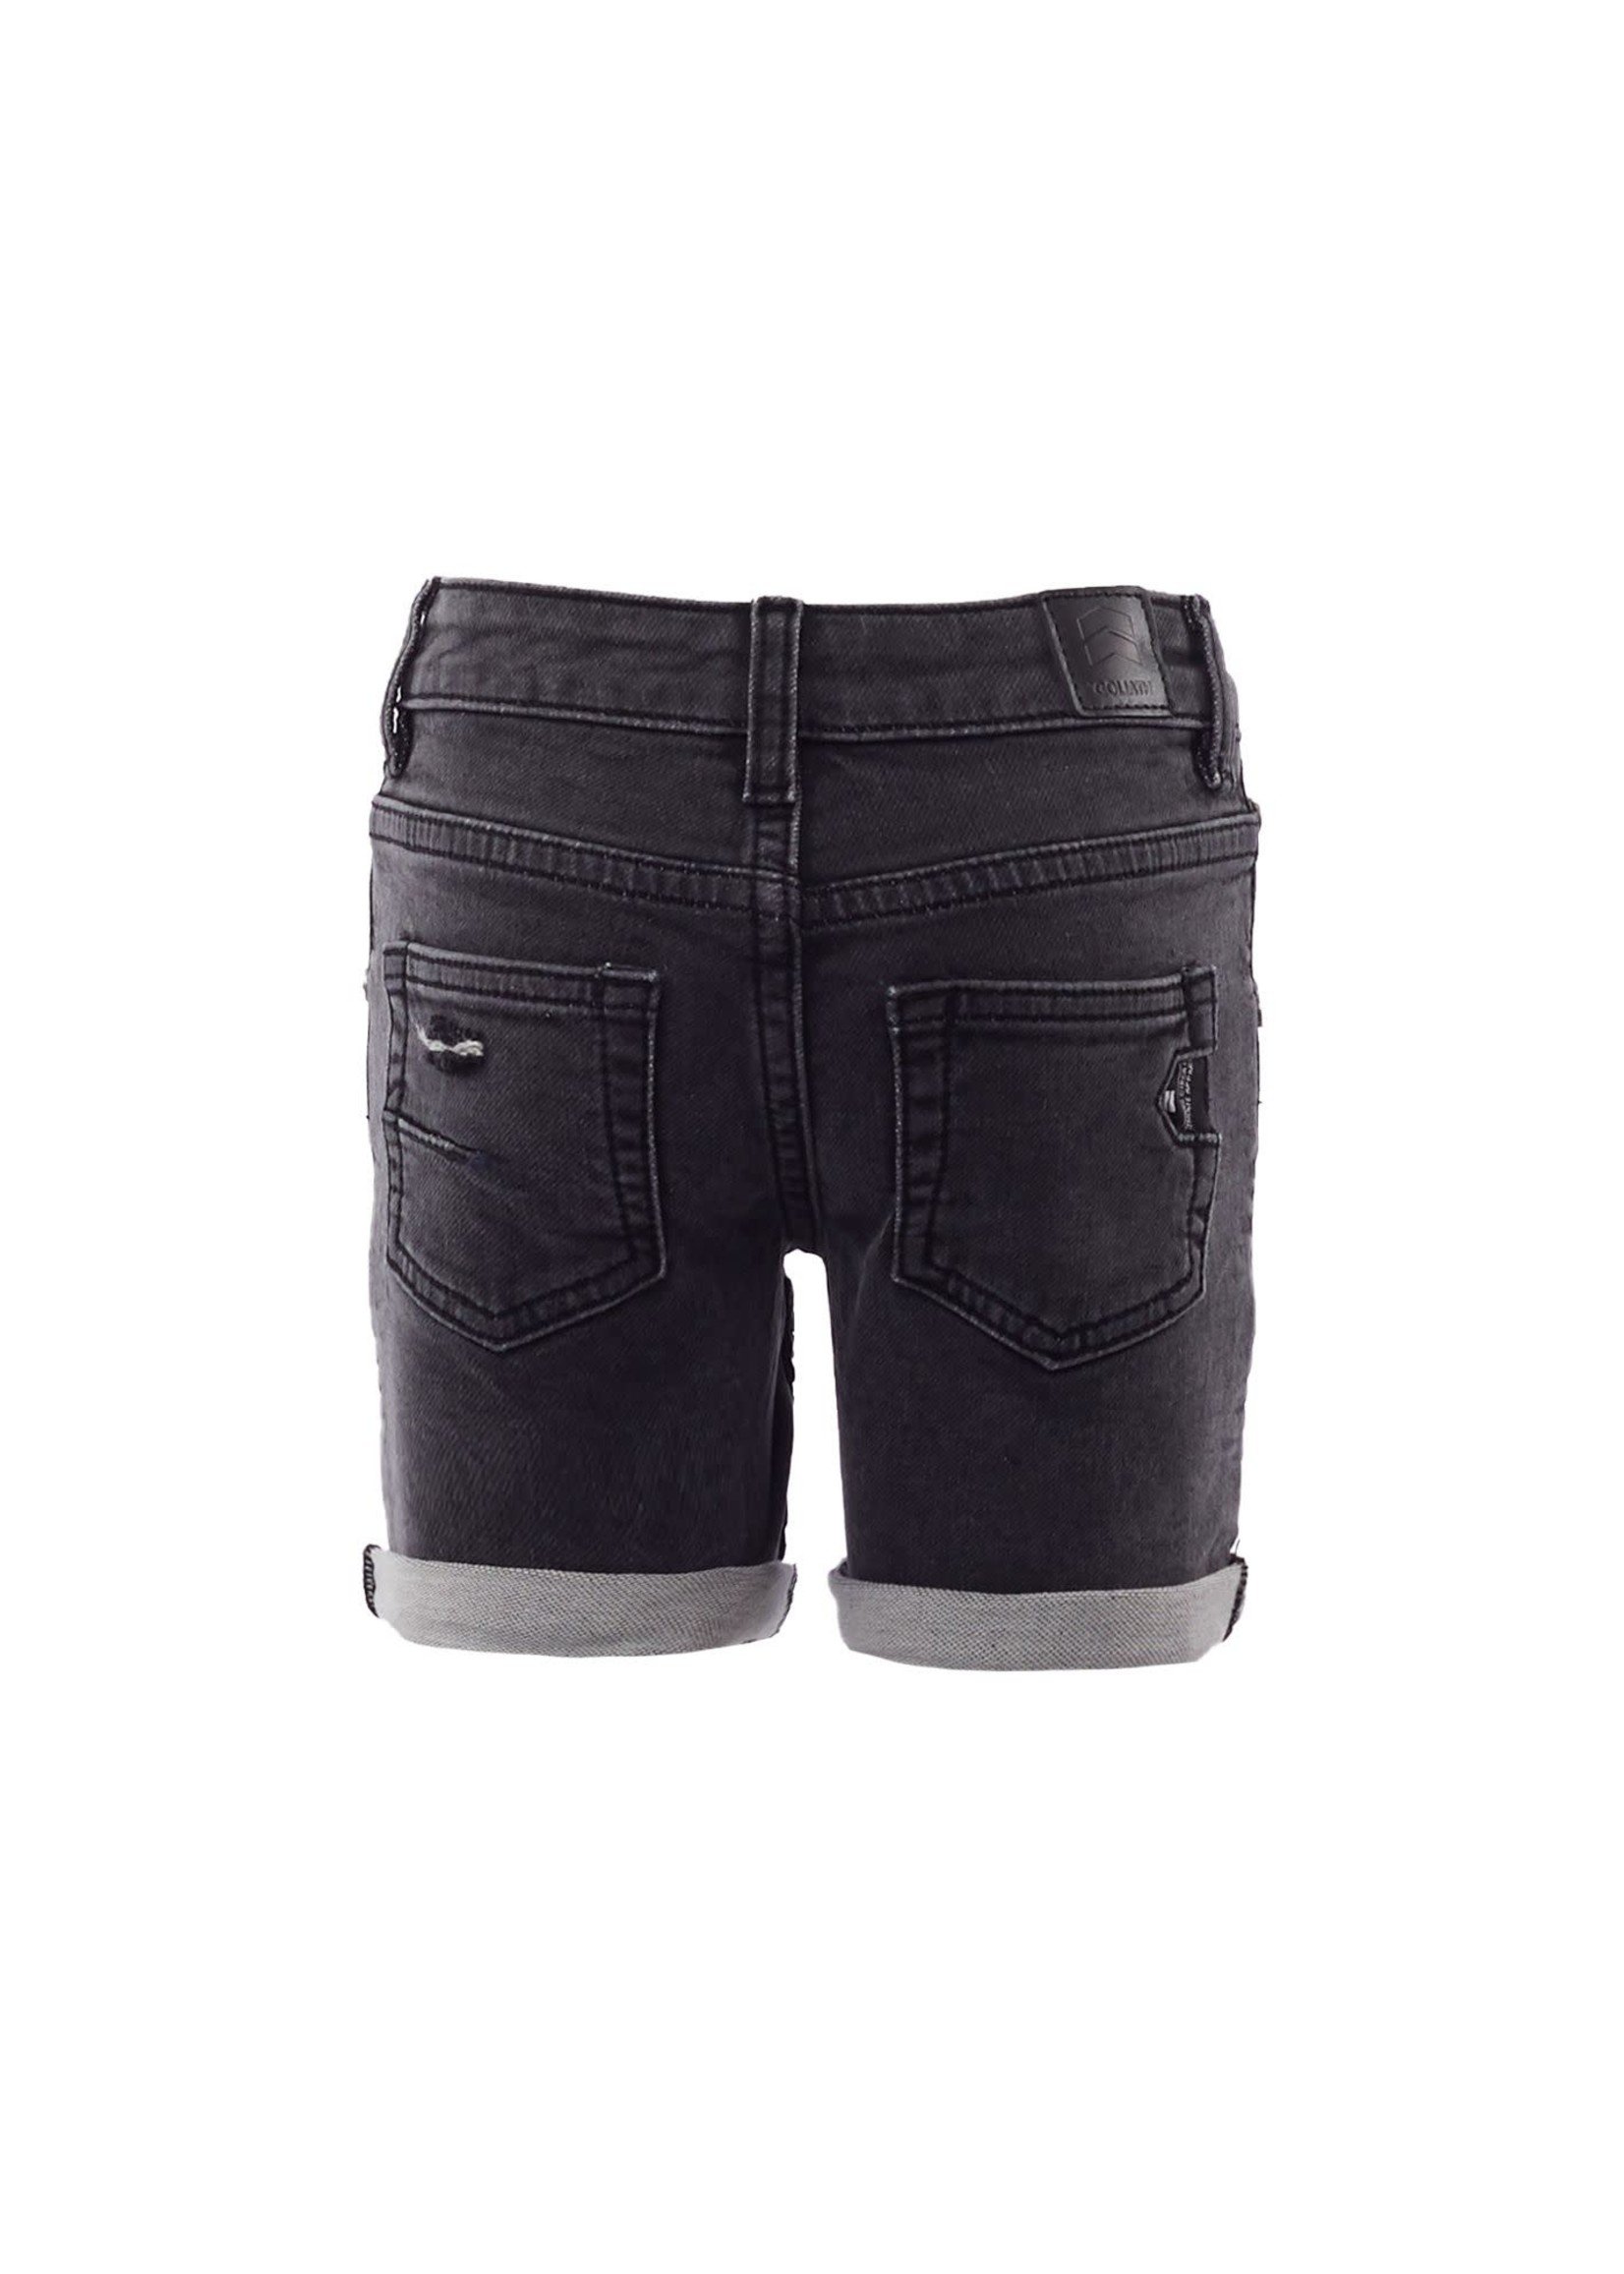 Silent Theory Airy Short 3-7 Black